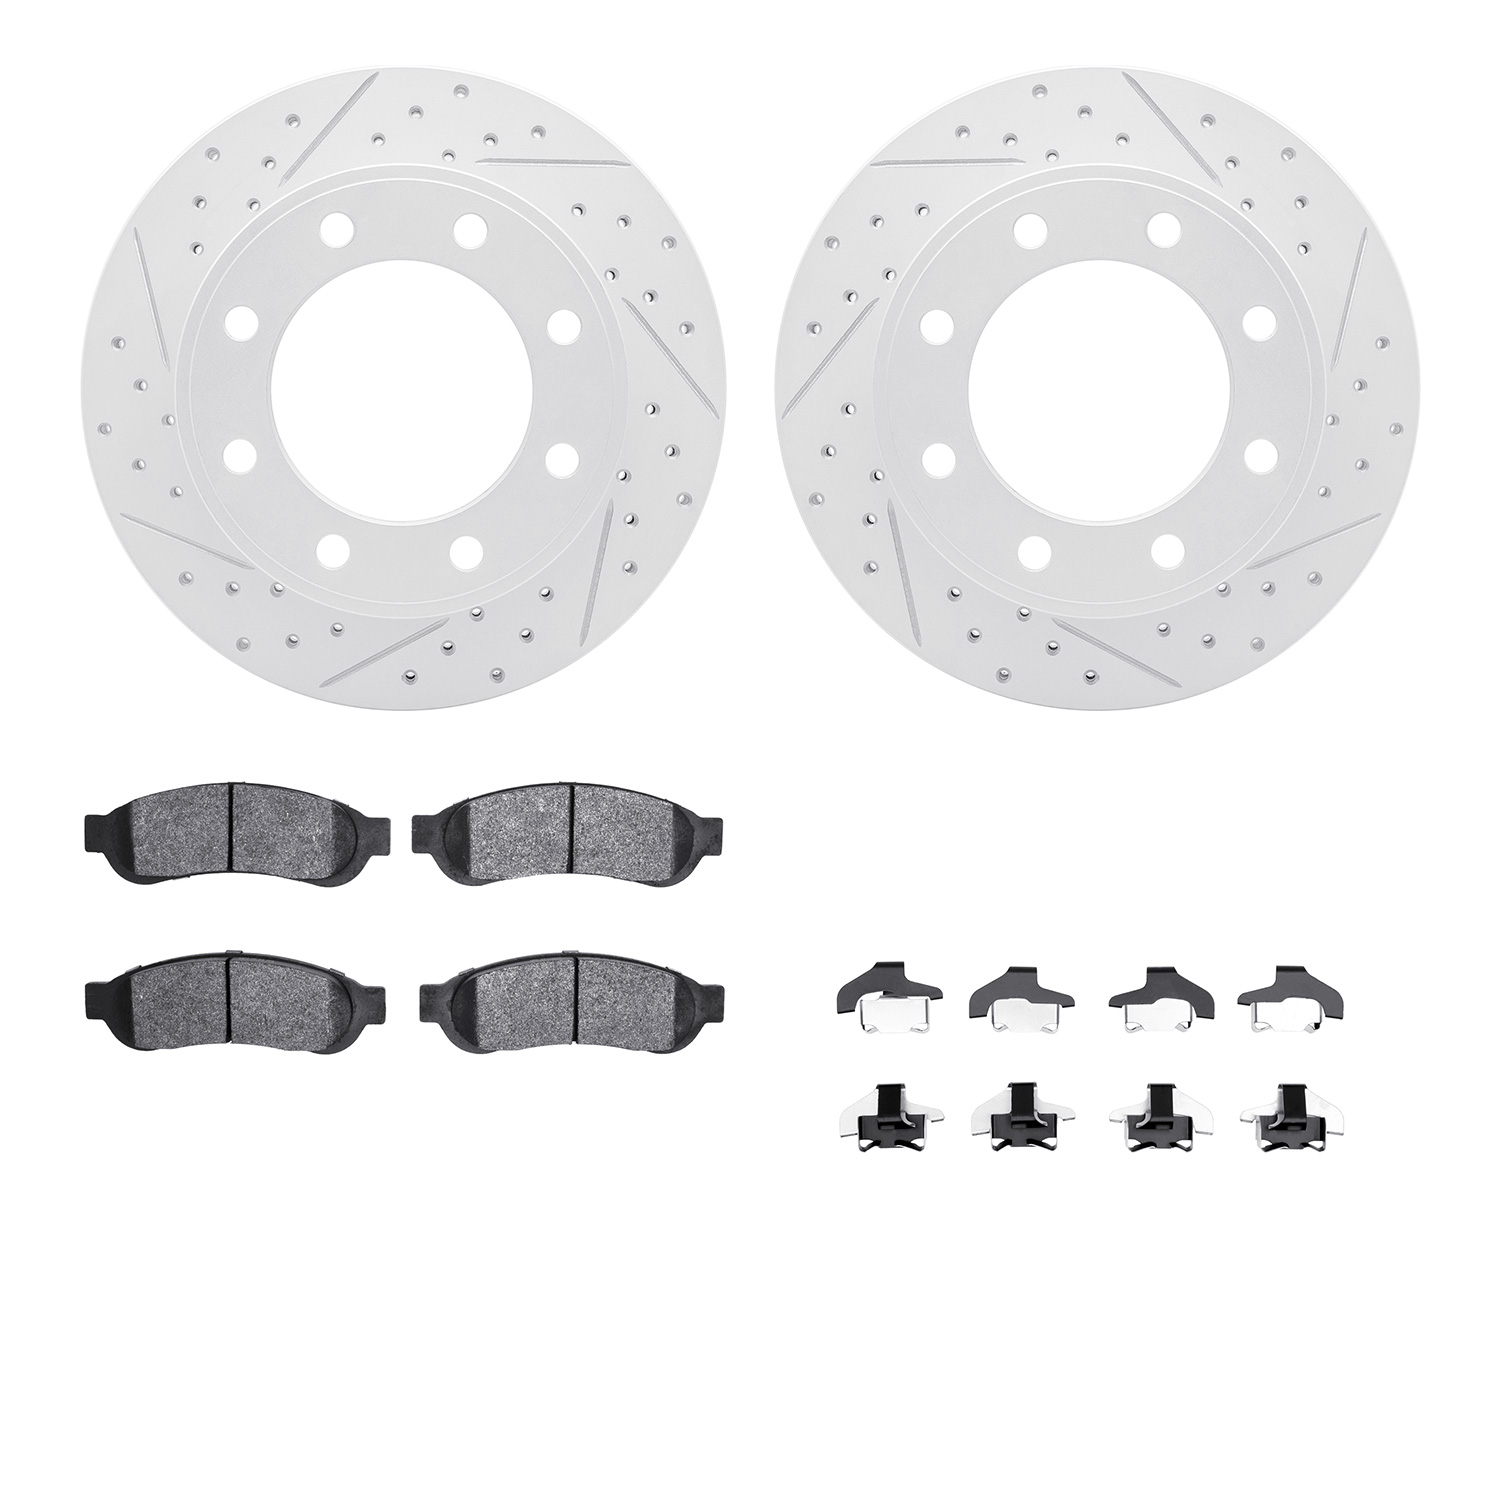 2212-99154 Geoperformance Drilled/Slotted Rotors w/Heavy-Duty Pads Kit & Hardware, 2006-2010 Ford/Lincoln/Mercury/Mazda, Positio